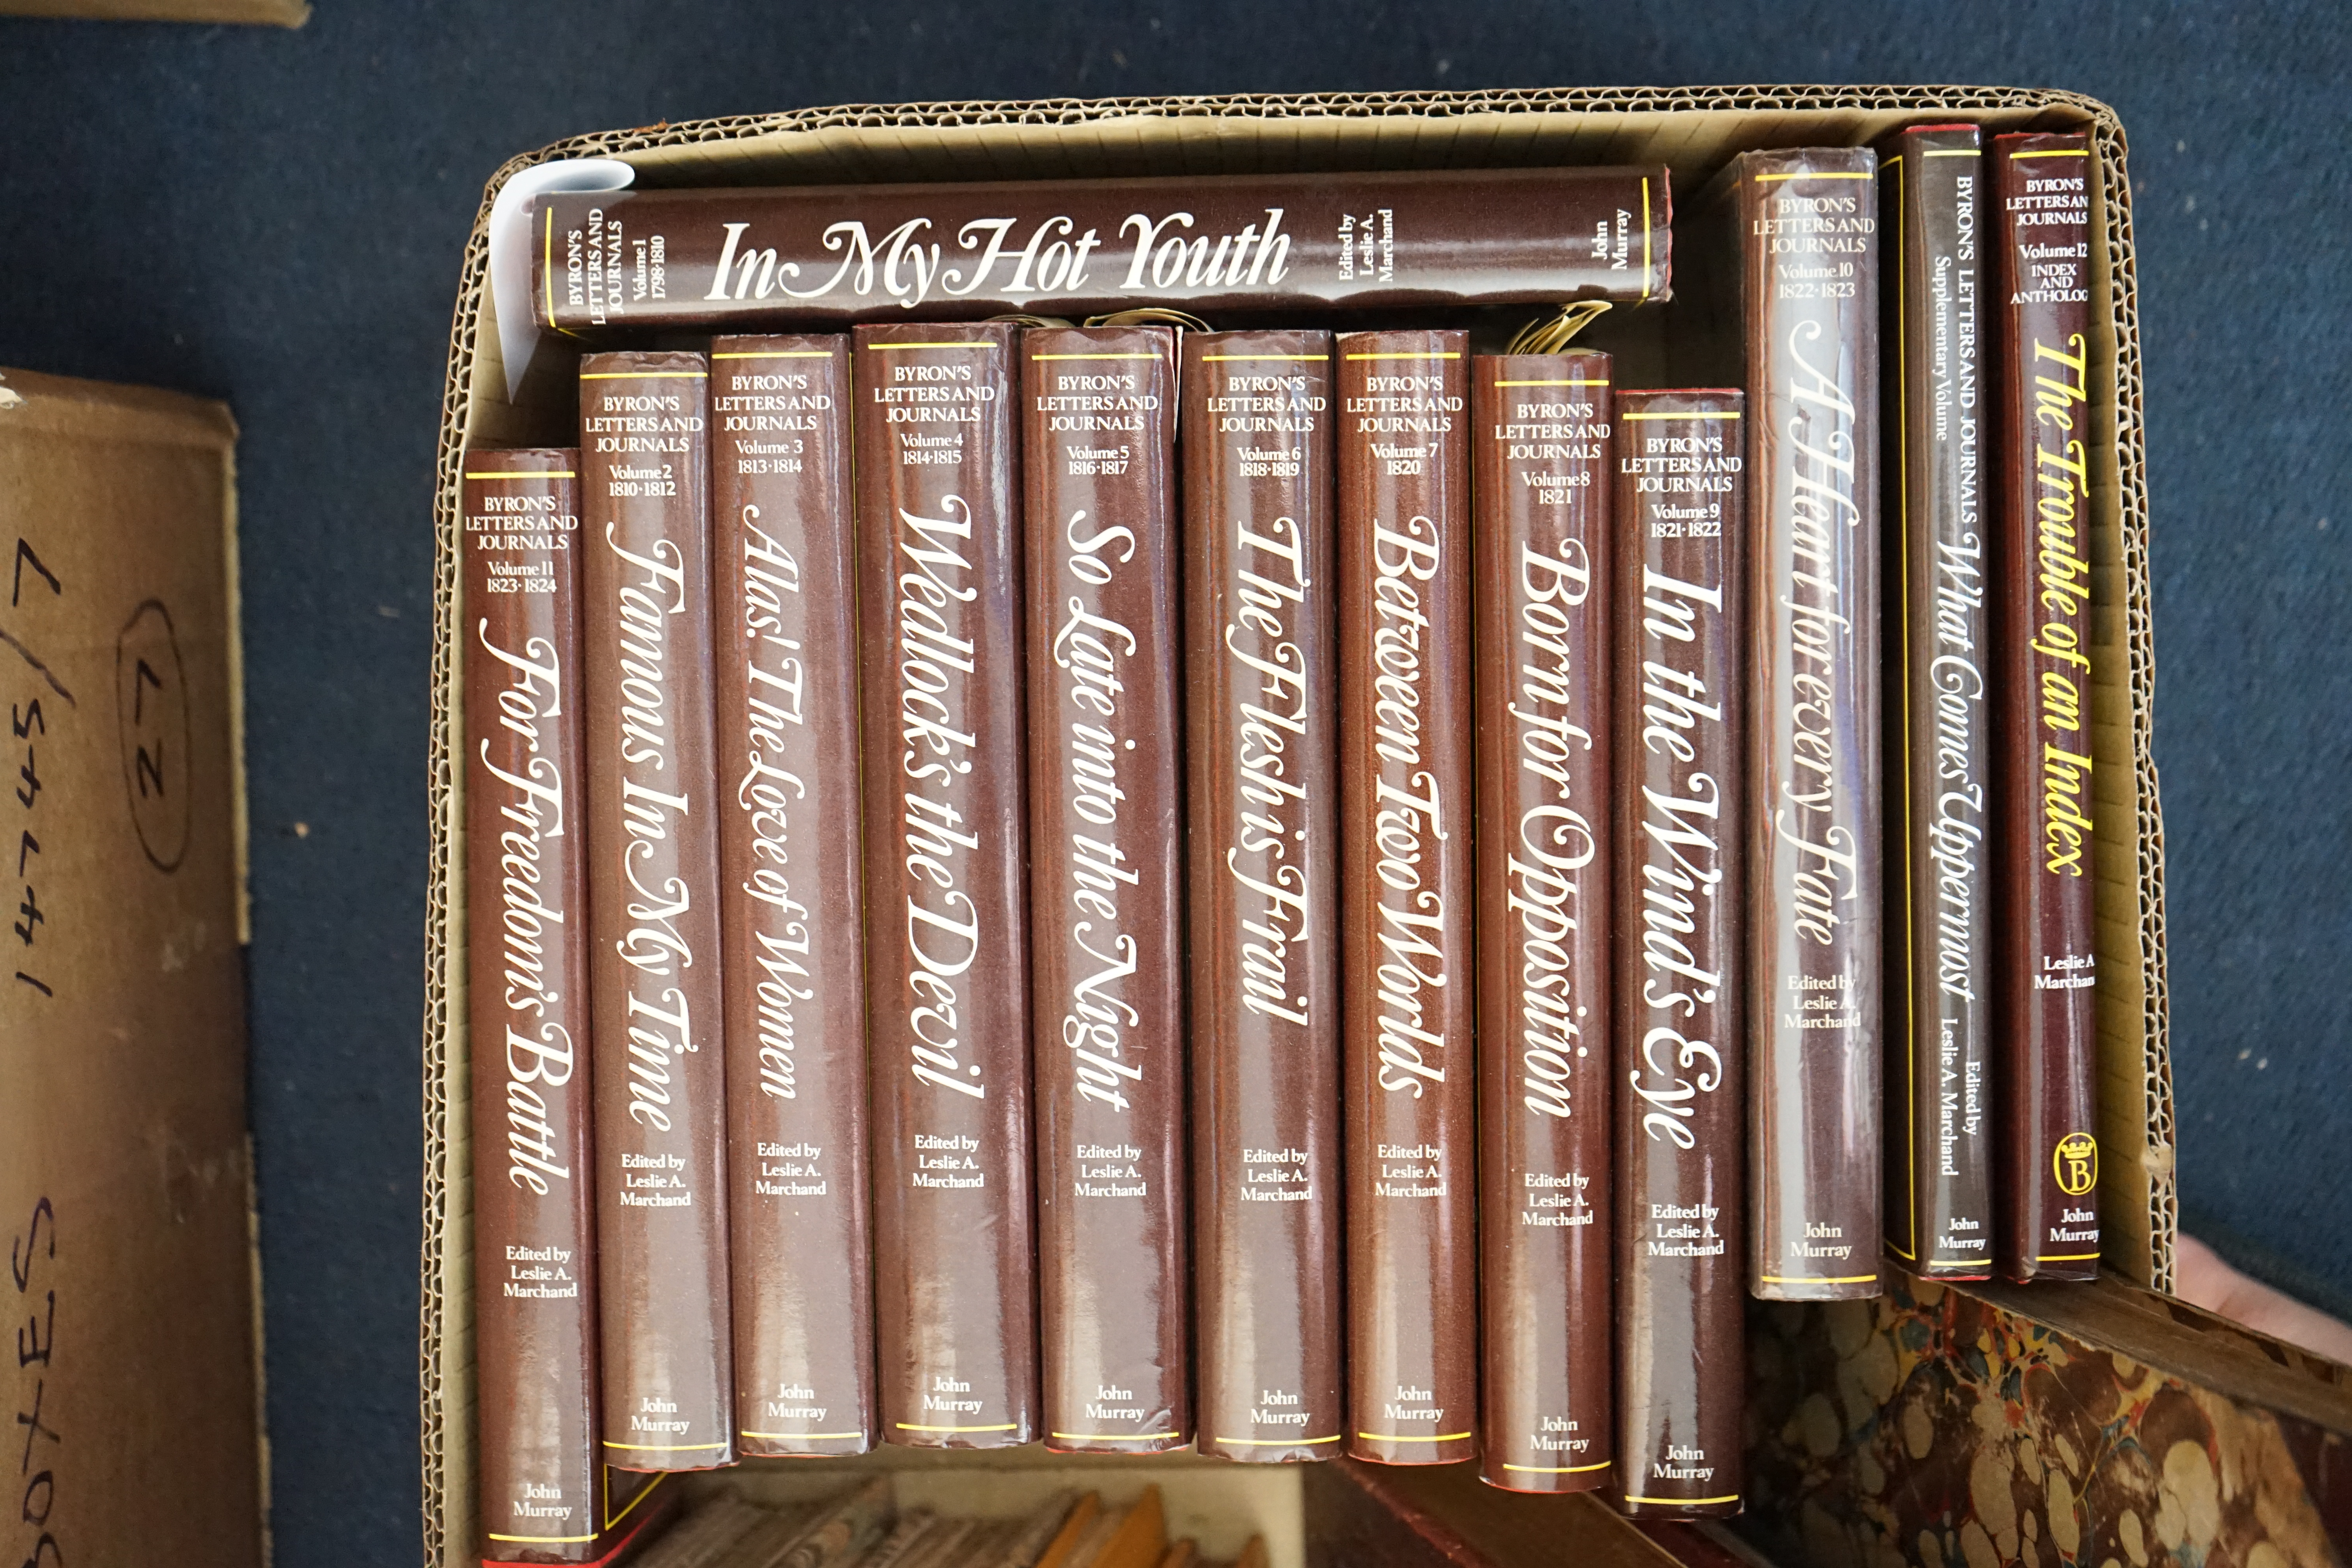 Marchant, Leslie A (editor) - Byron’s Letters and Journals, 13 vols, including general index, 8vo, original red cloth, with d/j’s, mixed editions, vol 1 with authors presentation inscription, John Murray, London, 1974-82